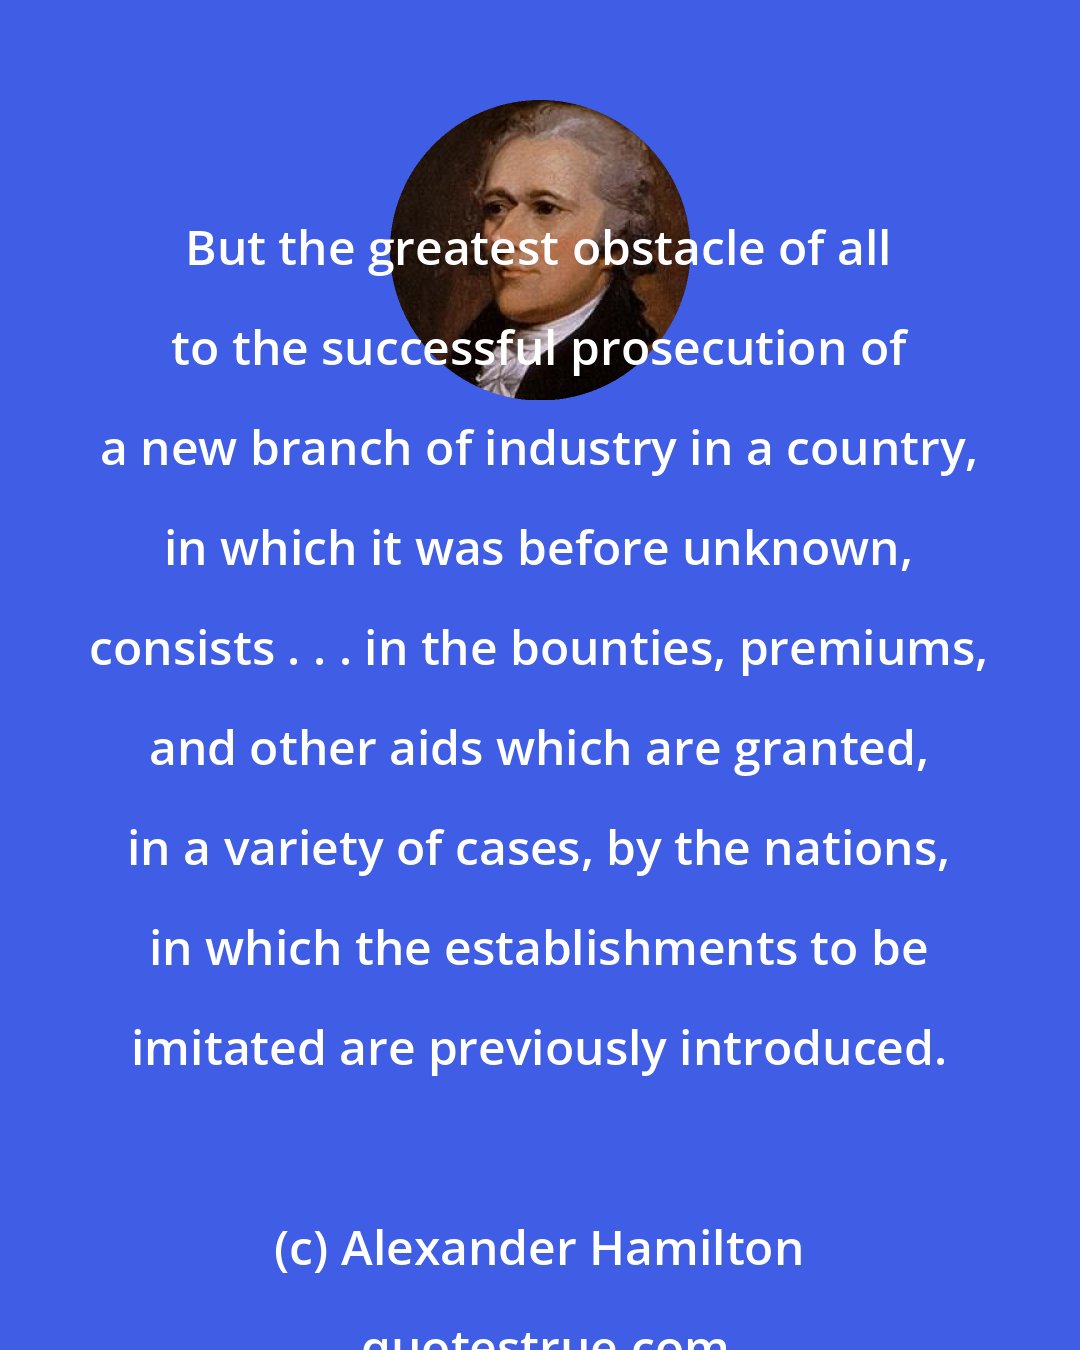 Alexander Hamilton: But the greatest obstacle of all to the successful prosecution of a new branch of industry in a country, in which it was before unknown, consists . . . in the bounties, premiums, and other aids which are granted, in a variety of cases, by the nations, in which the establishments to be imitated are previously introduced.